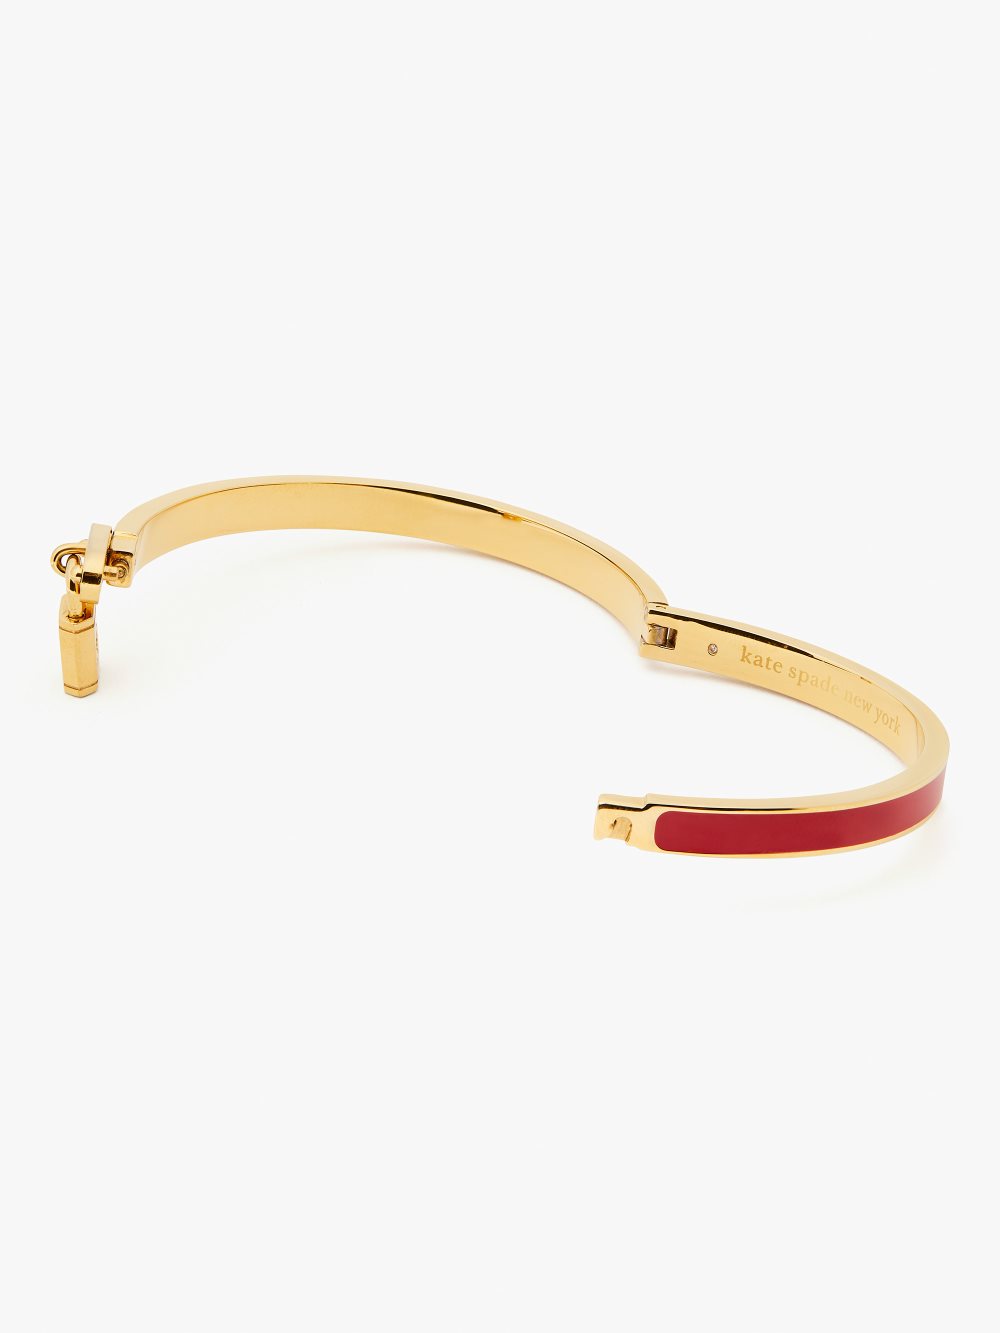 Women's red. lock and spade charm bangle | Kate Spade